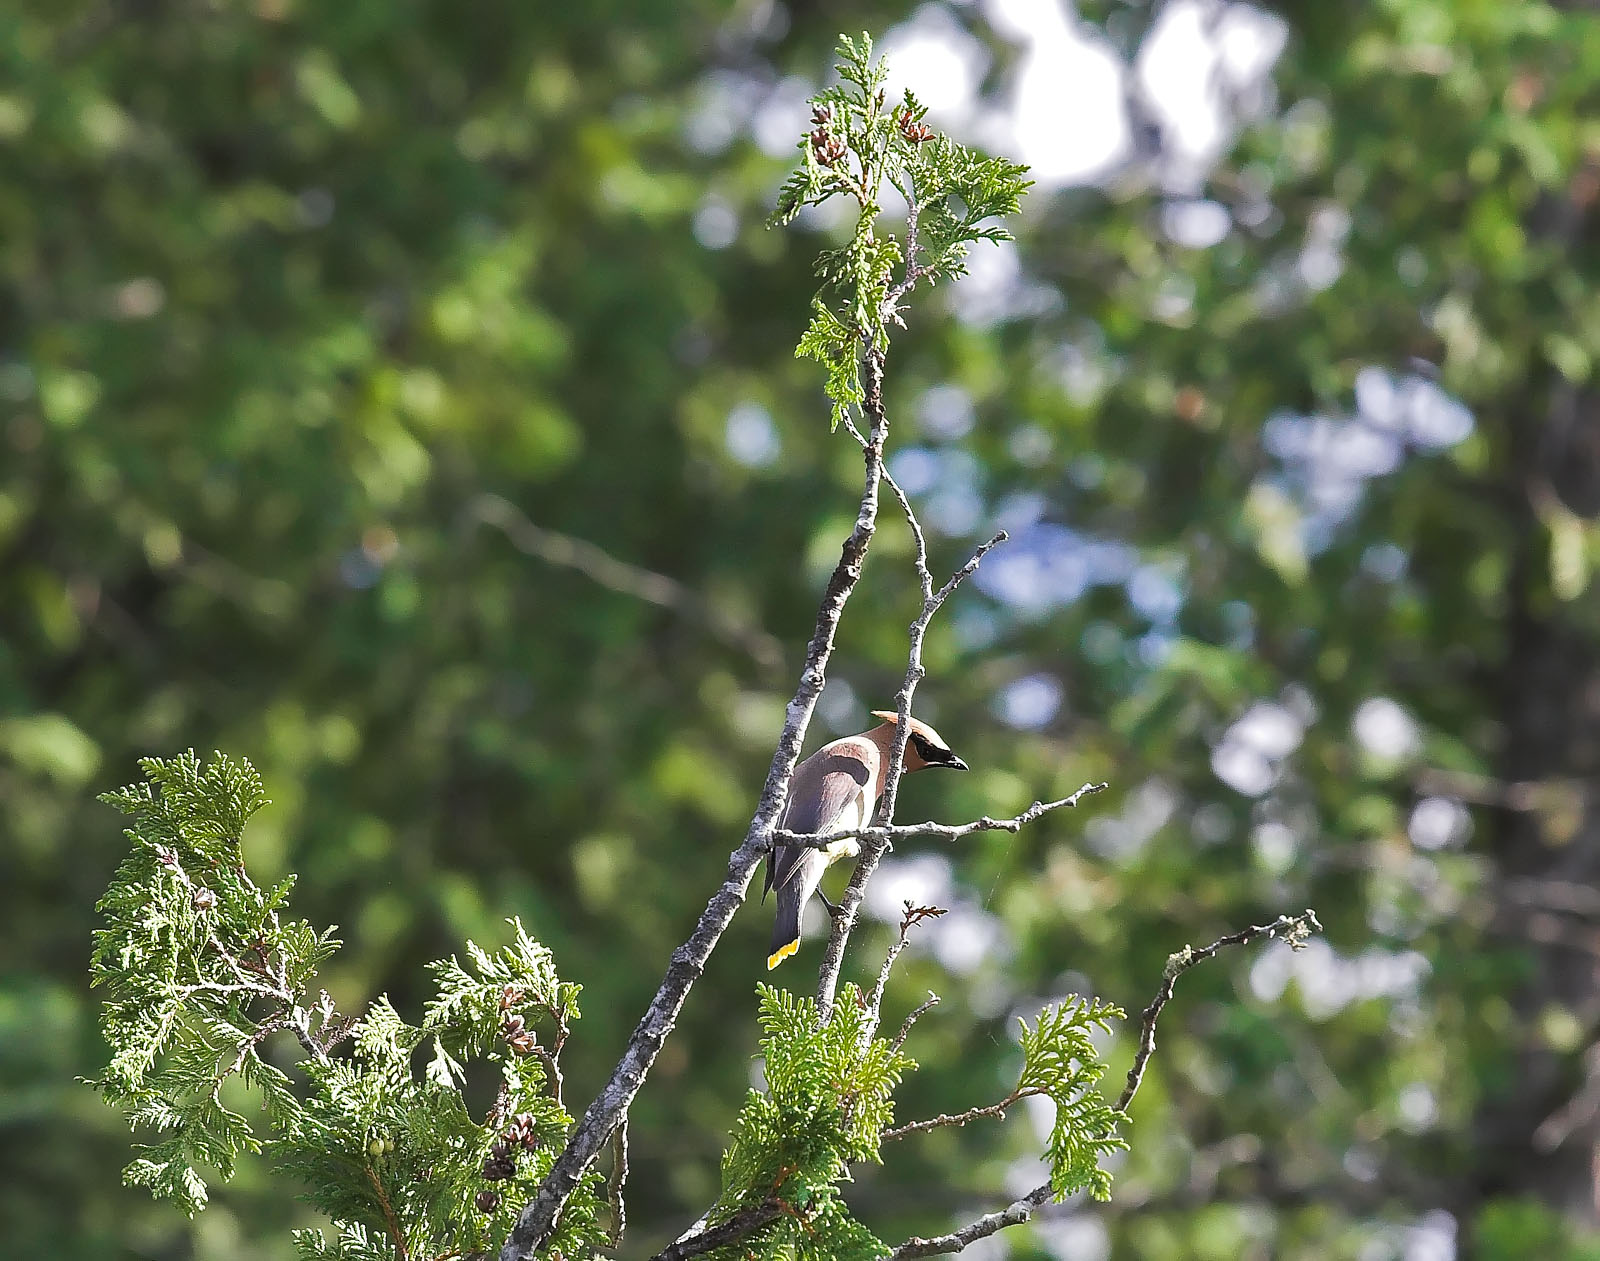 I photographed this cedar waxwing from the canoe as we passed by it. From the Bois Brule River in Wisconsin.